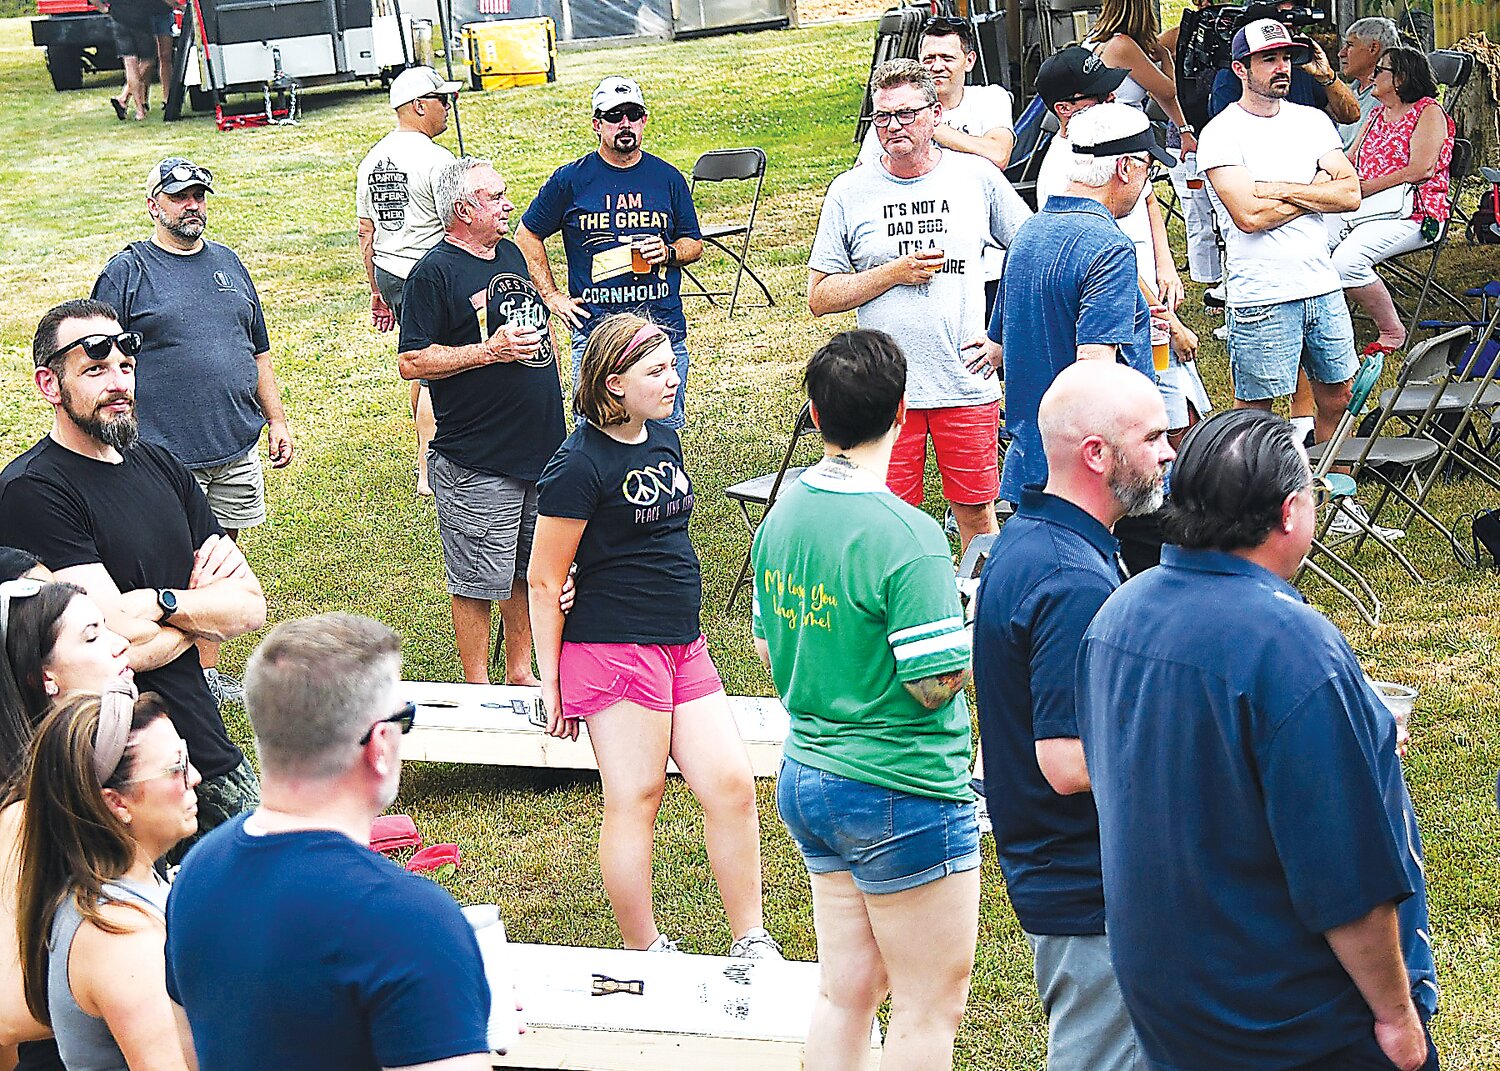 Participants and spectators listen to the list of teams for the cornhole tournament.